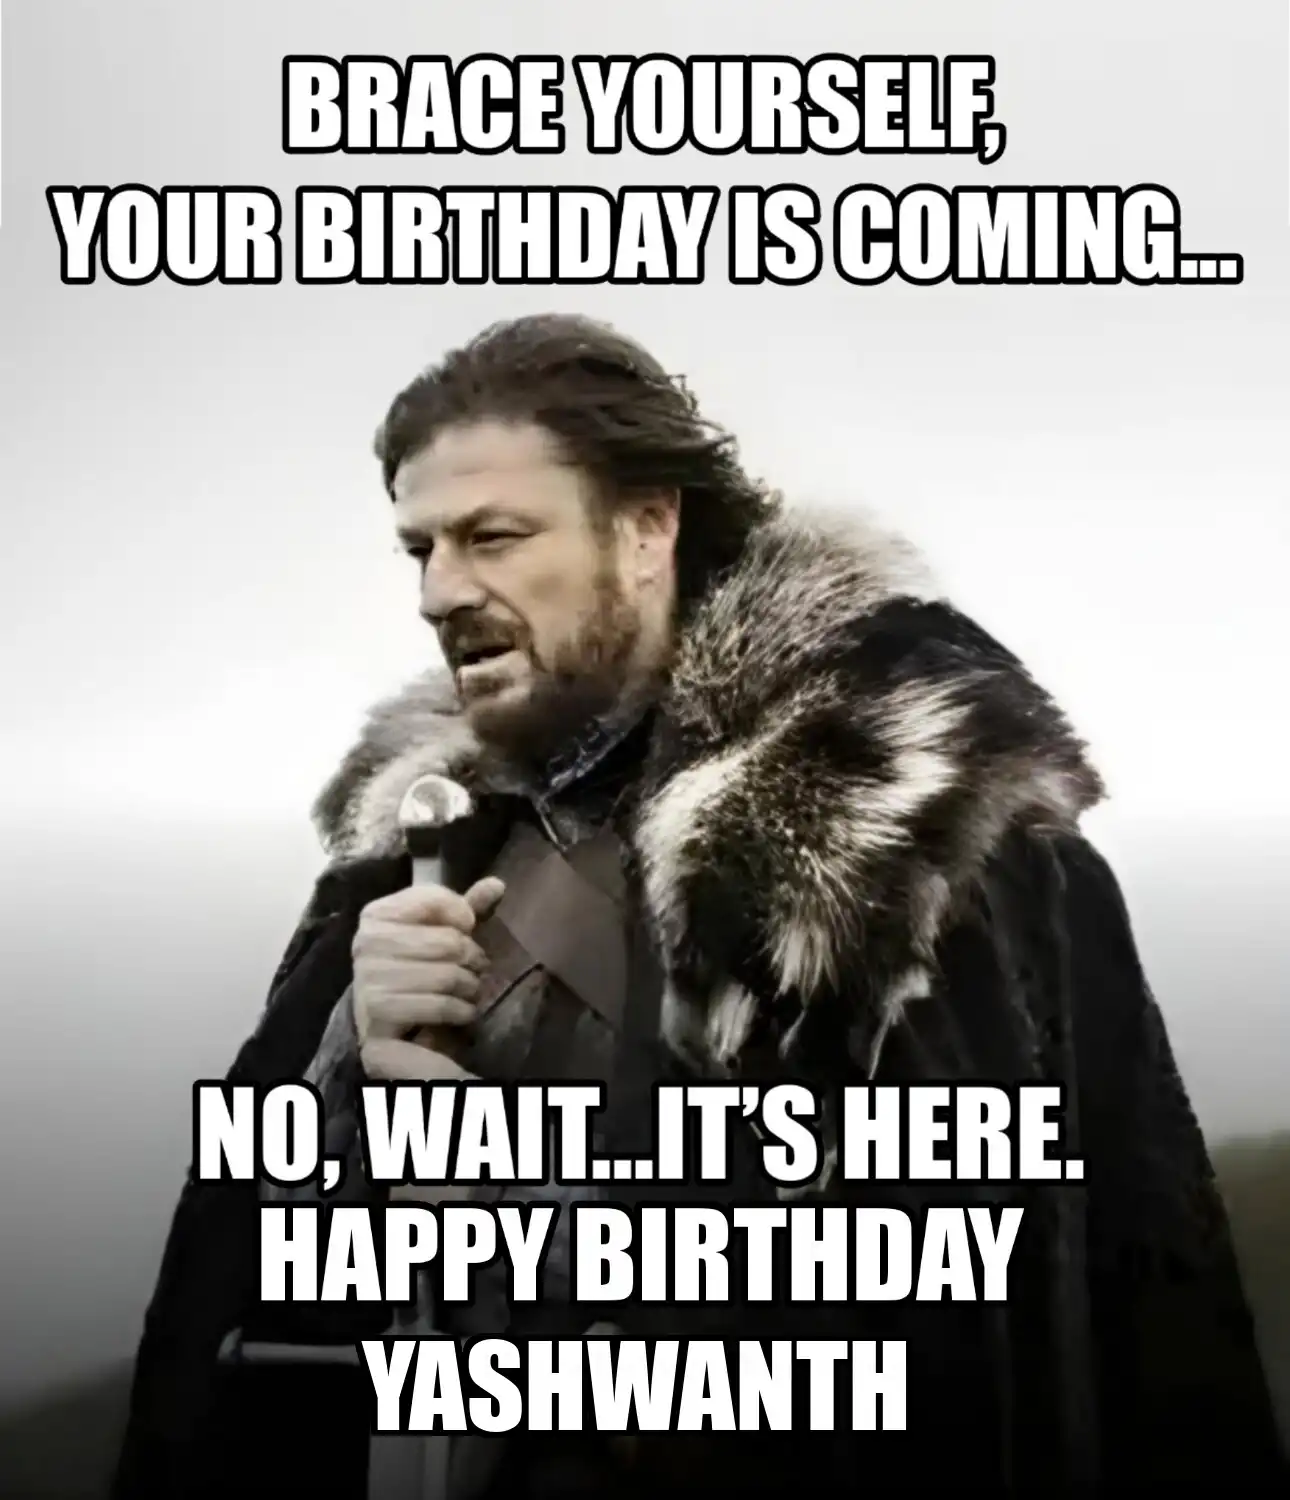 Happy Birthday Yashwanth Brace Yourself Your Birthday Is Coming Meme